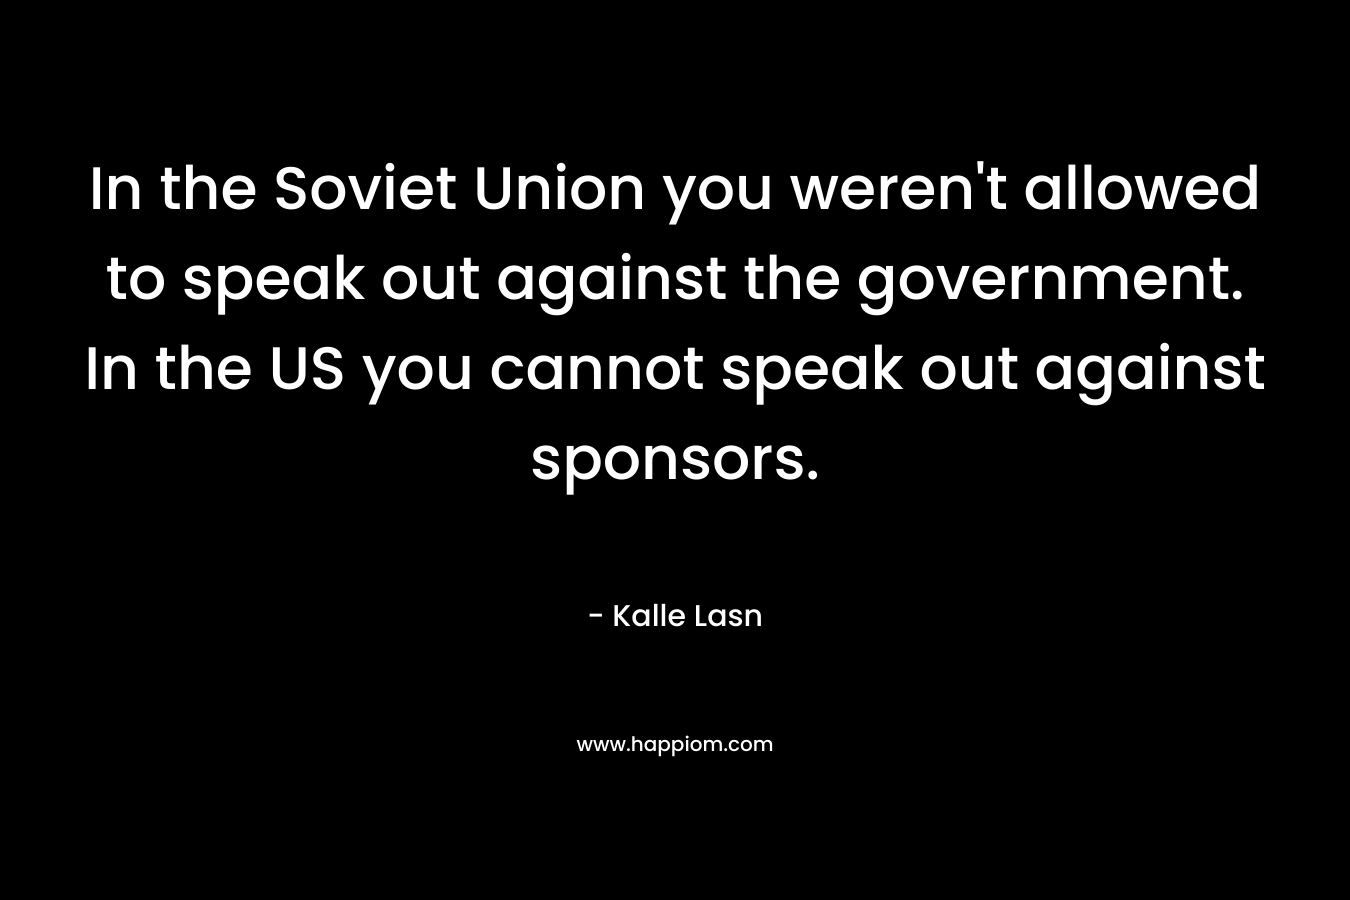 In the Soviet Union you weren’t allowed to speak out against the government. In the US you cannot speak out against sponsors. – Kalle Lasn